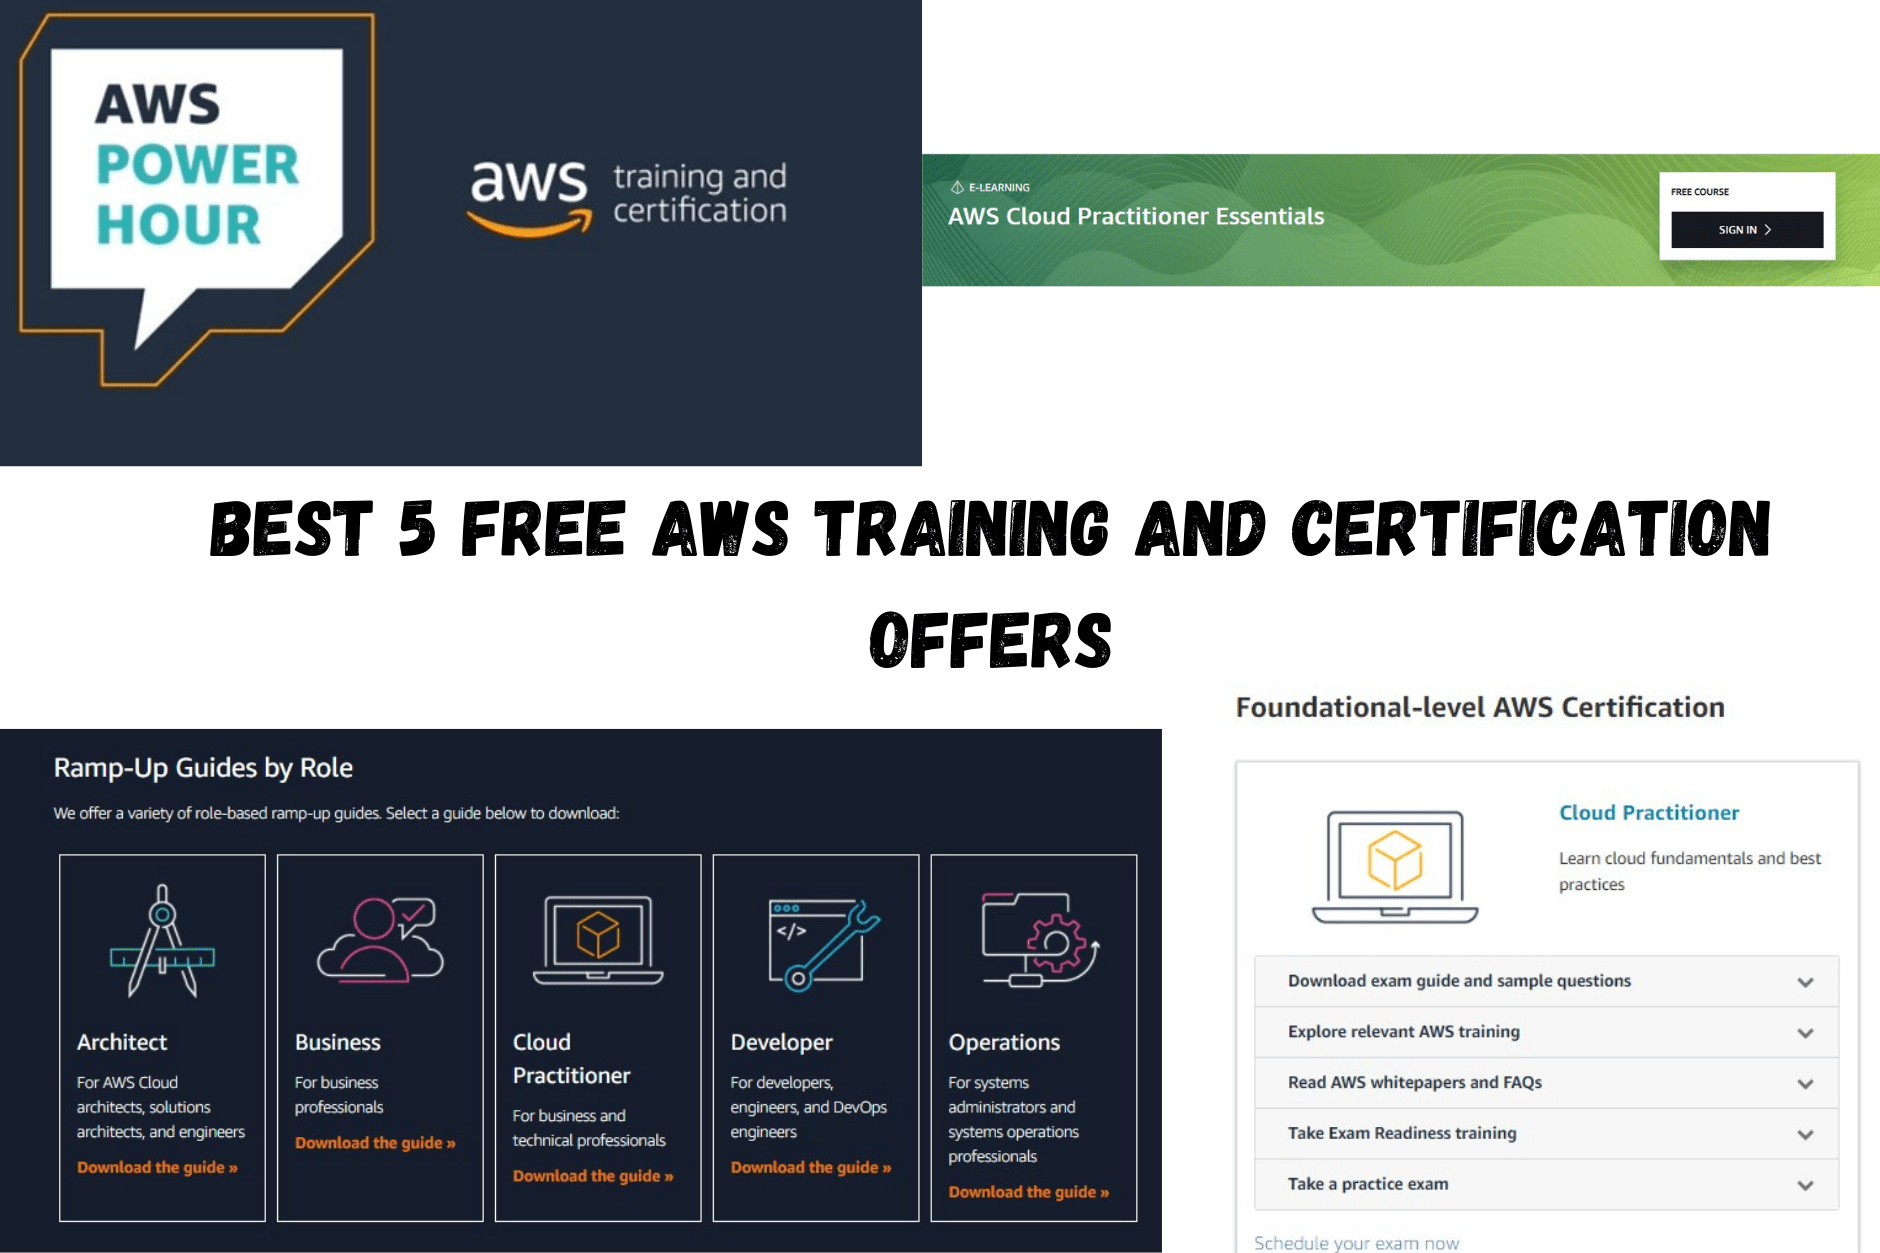 Best 5 Free AWS Training and Certification offers